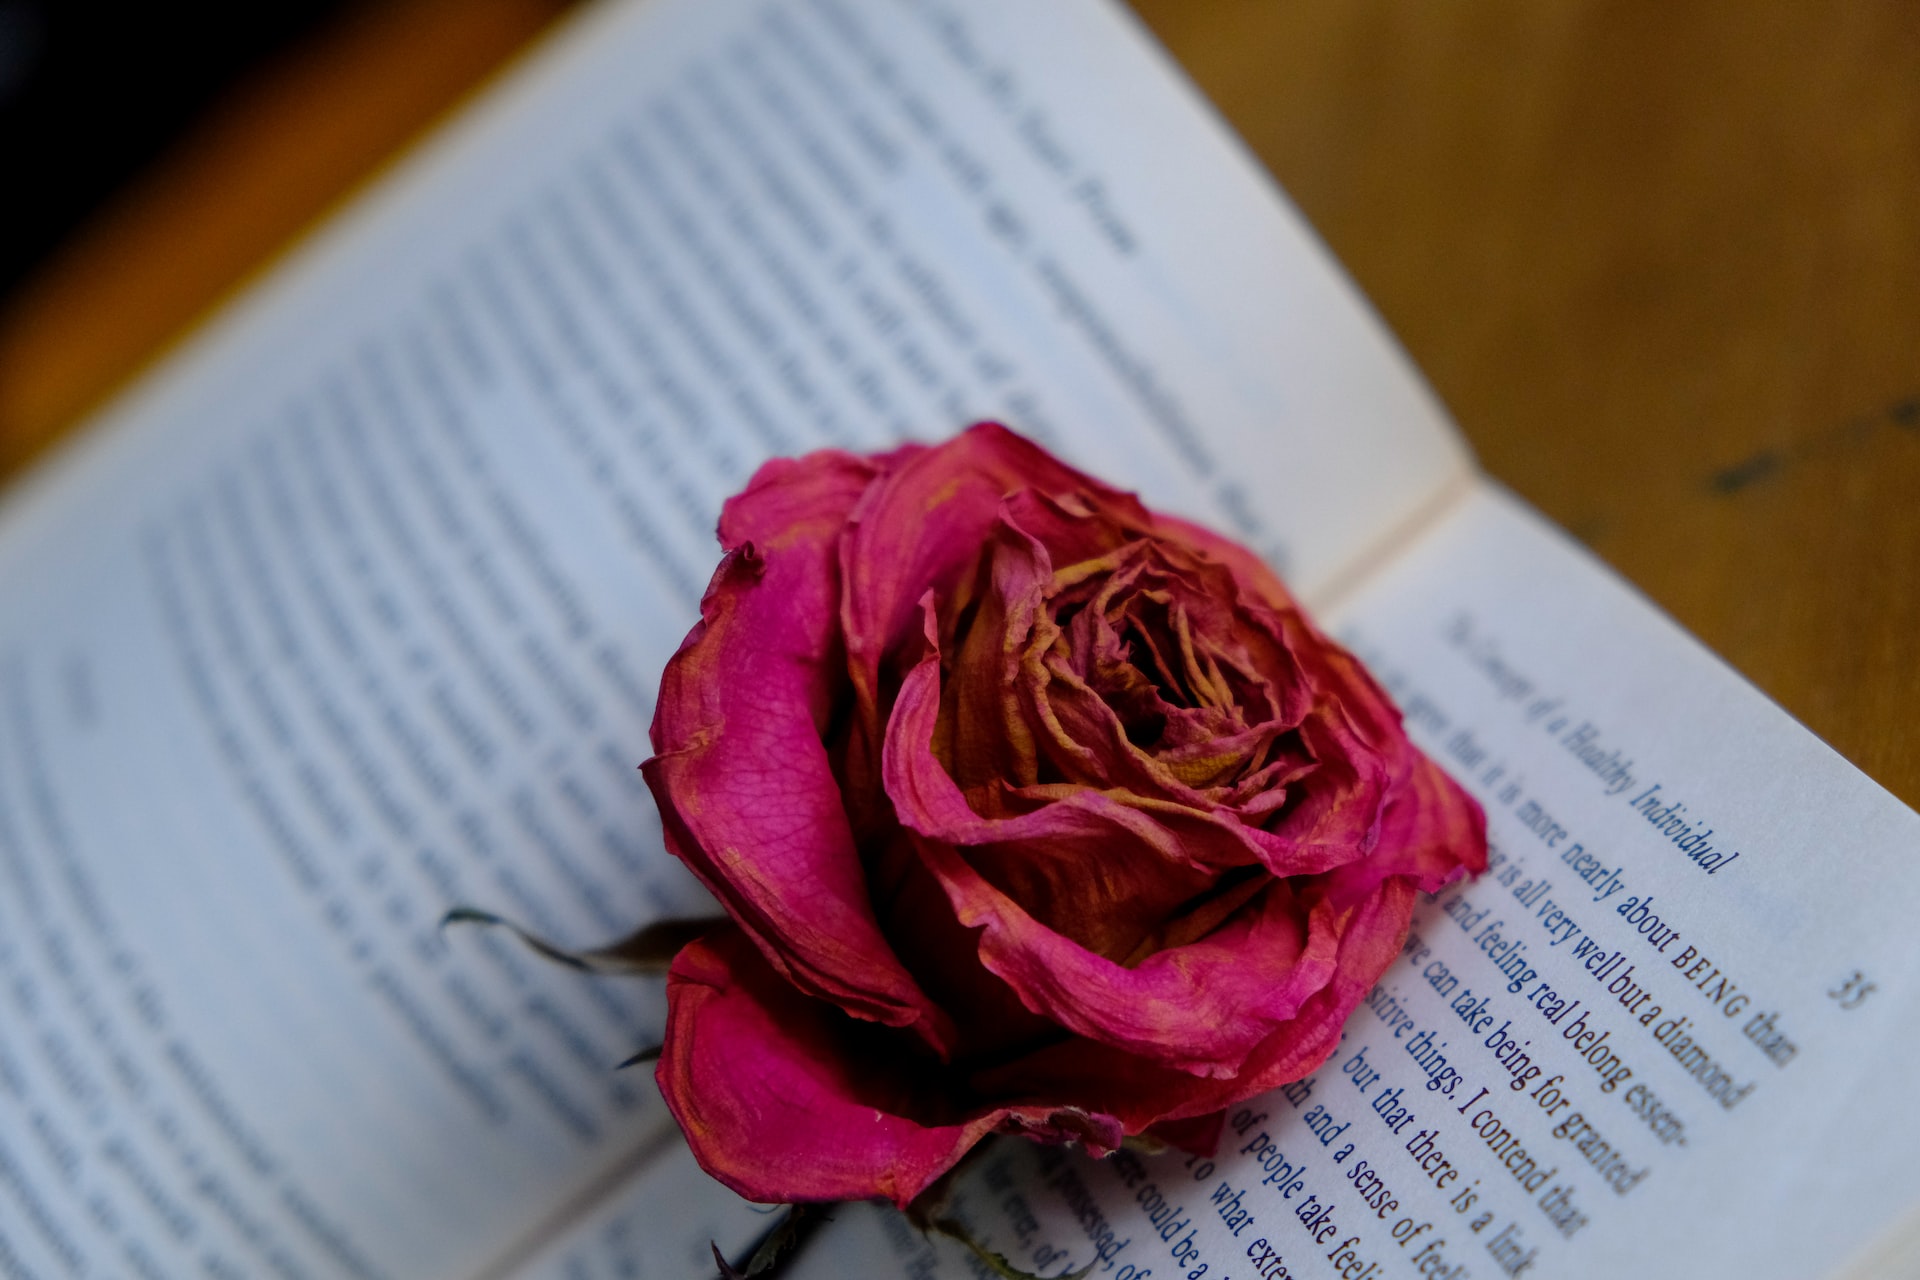 Discover Bibliotherapy’s Amazing Power to Change Your Life